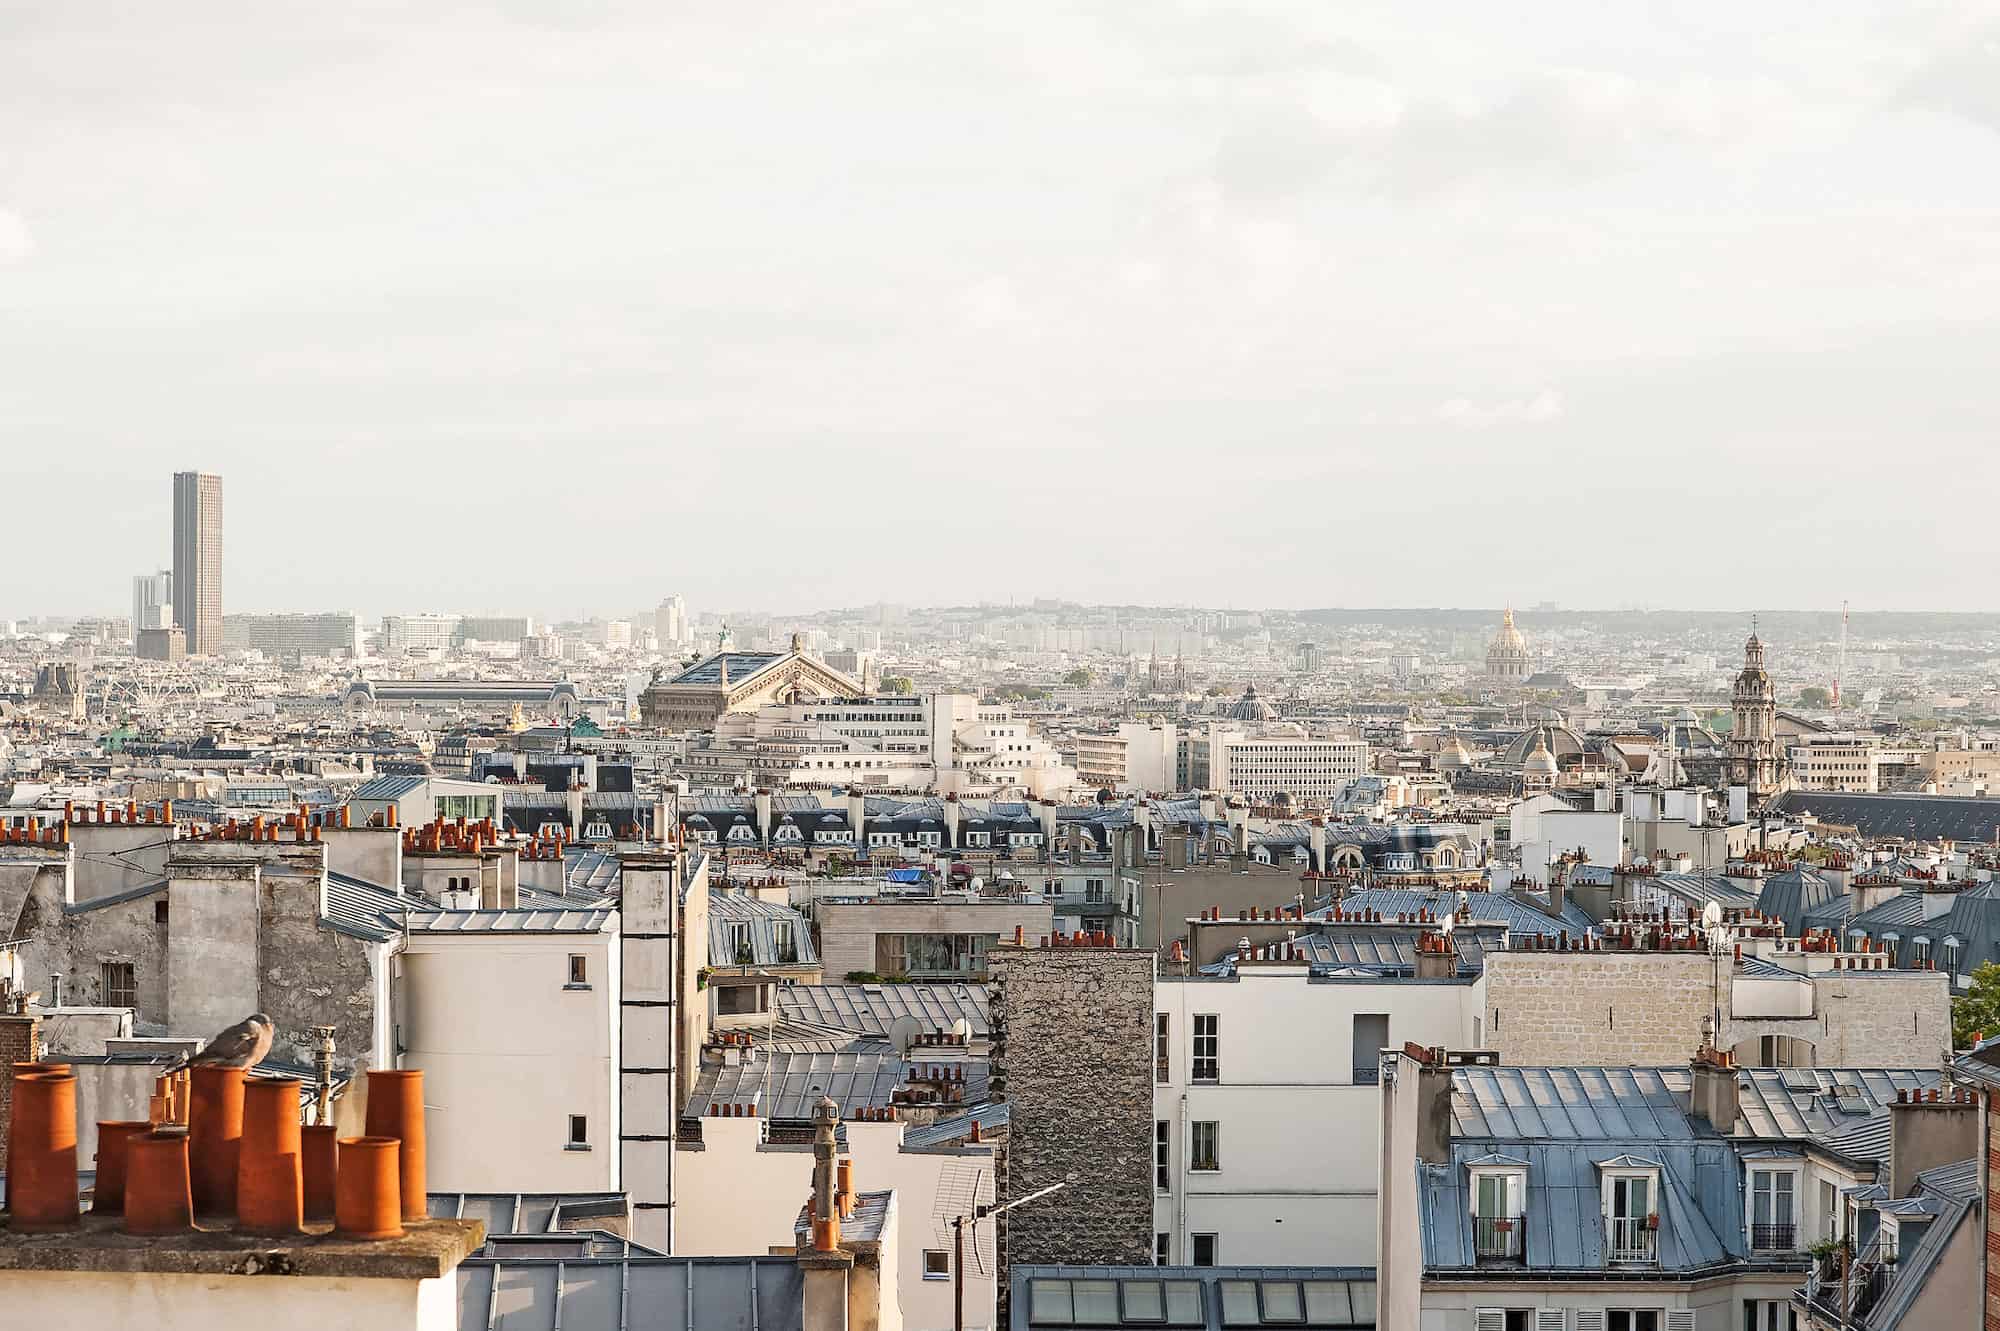 The panoramic view of the Paris rooftops from the top of Montmartre.